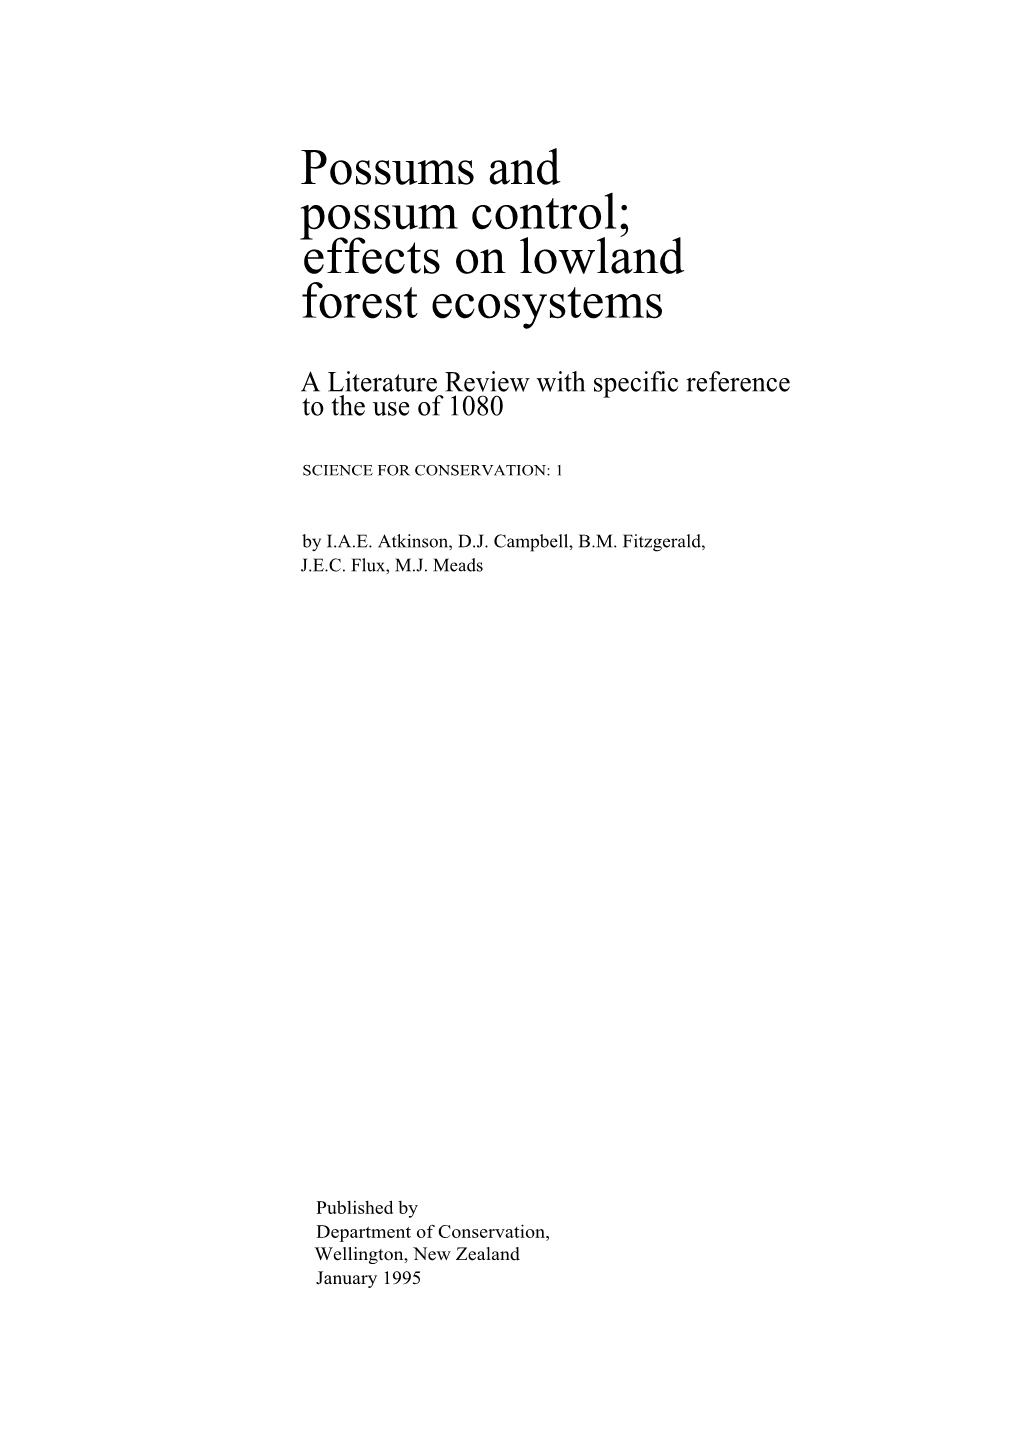 Possums and Possum Control; Effects on Lowland Forest Ecosystems